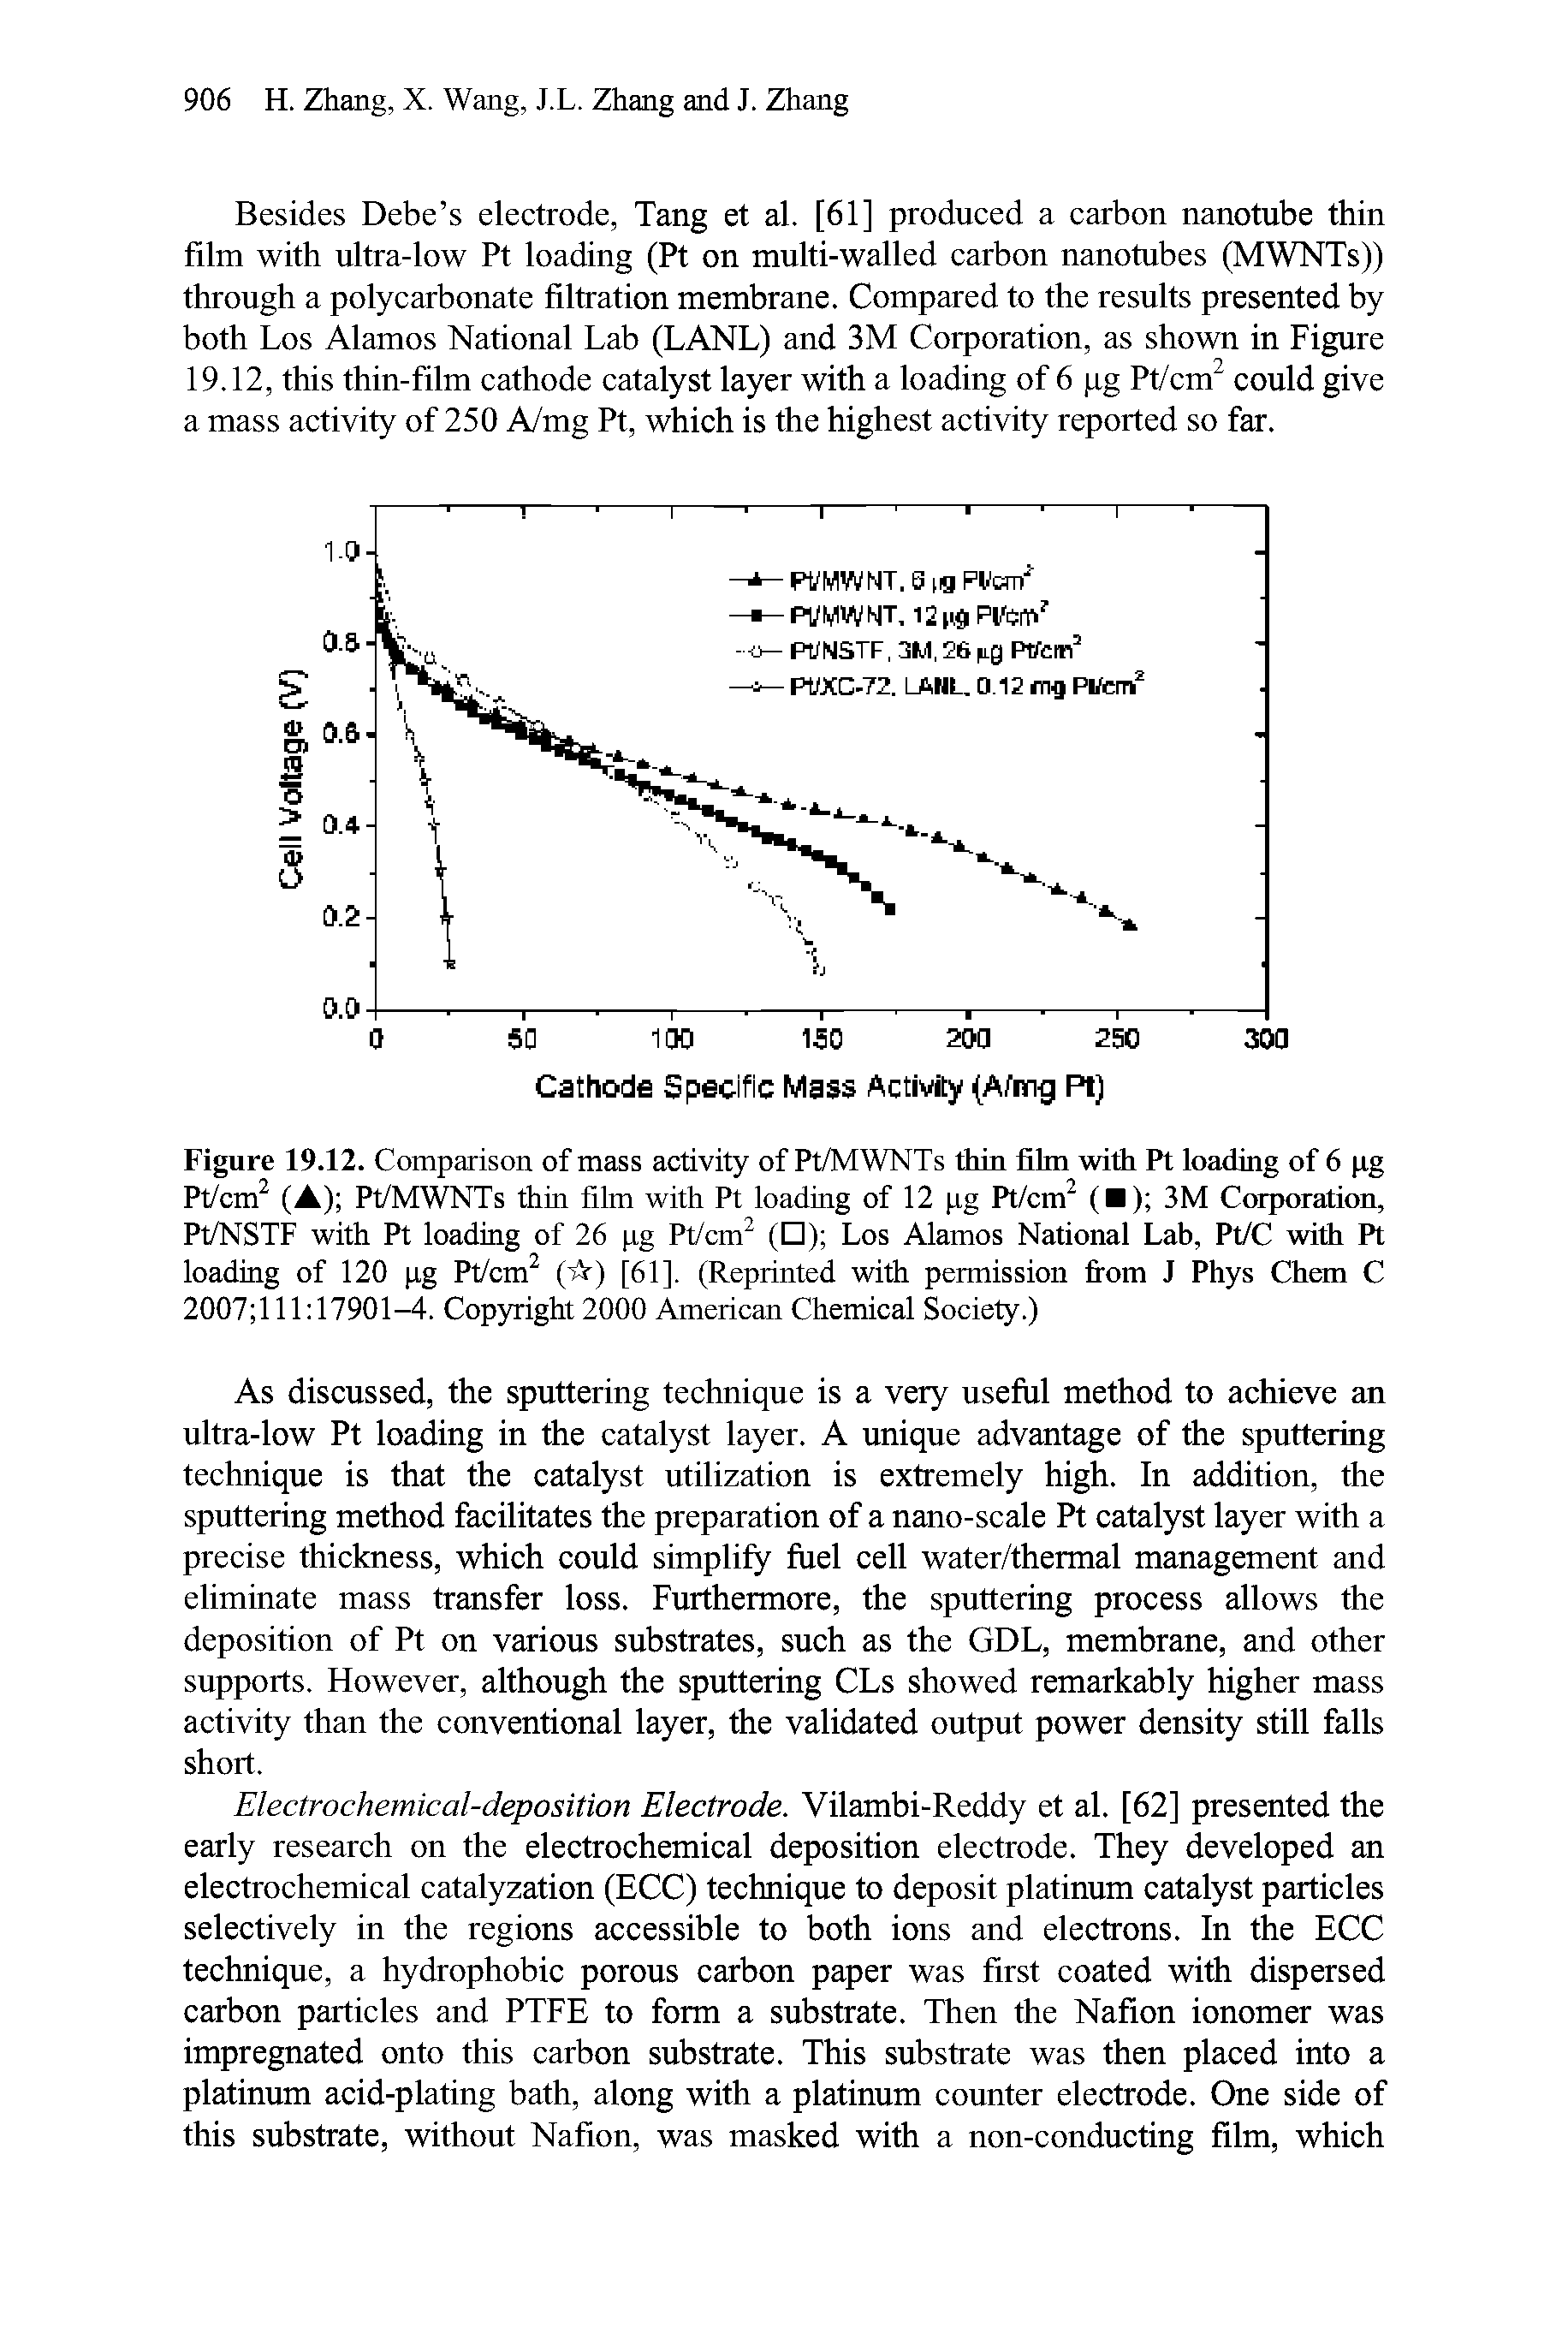 Figure 19.12. Comparison of mass activity of Pt/MWNTs thin film with Pt loading of 6 pg Pt/cm (A) Pt/MWNTs thin film with Pt loading of 12 pg Pt/cm ( ) 3M Corporation, Pt/NSTF with Pt loading of 26 pg Pt/cm ( ) Los Alamos National Lab, Pt/C with Pt loading of 120 pg Pt/cm (A) [61], (Reprinted with permission from J Phys Chem C 2007 111 17901-4. Copyright 2000 American Chemical Society.)...